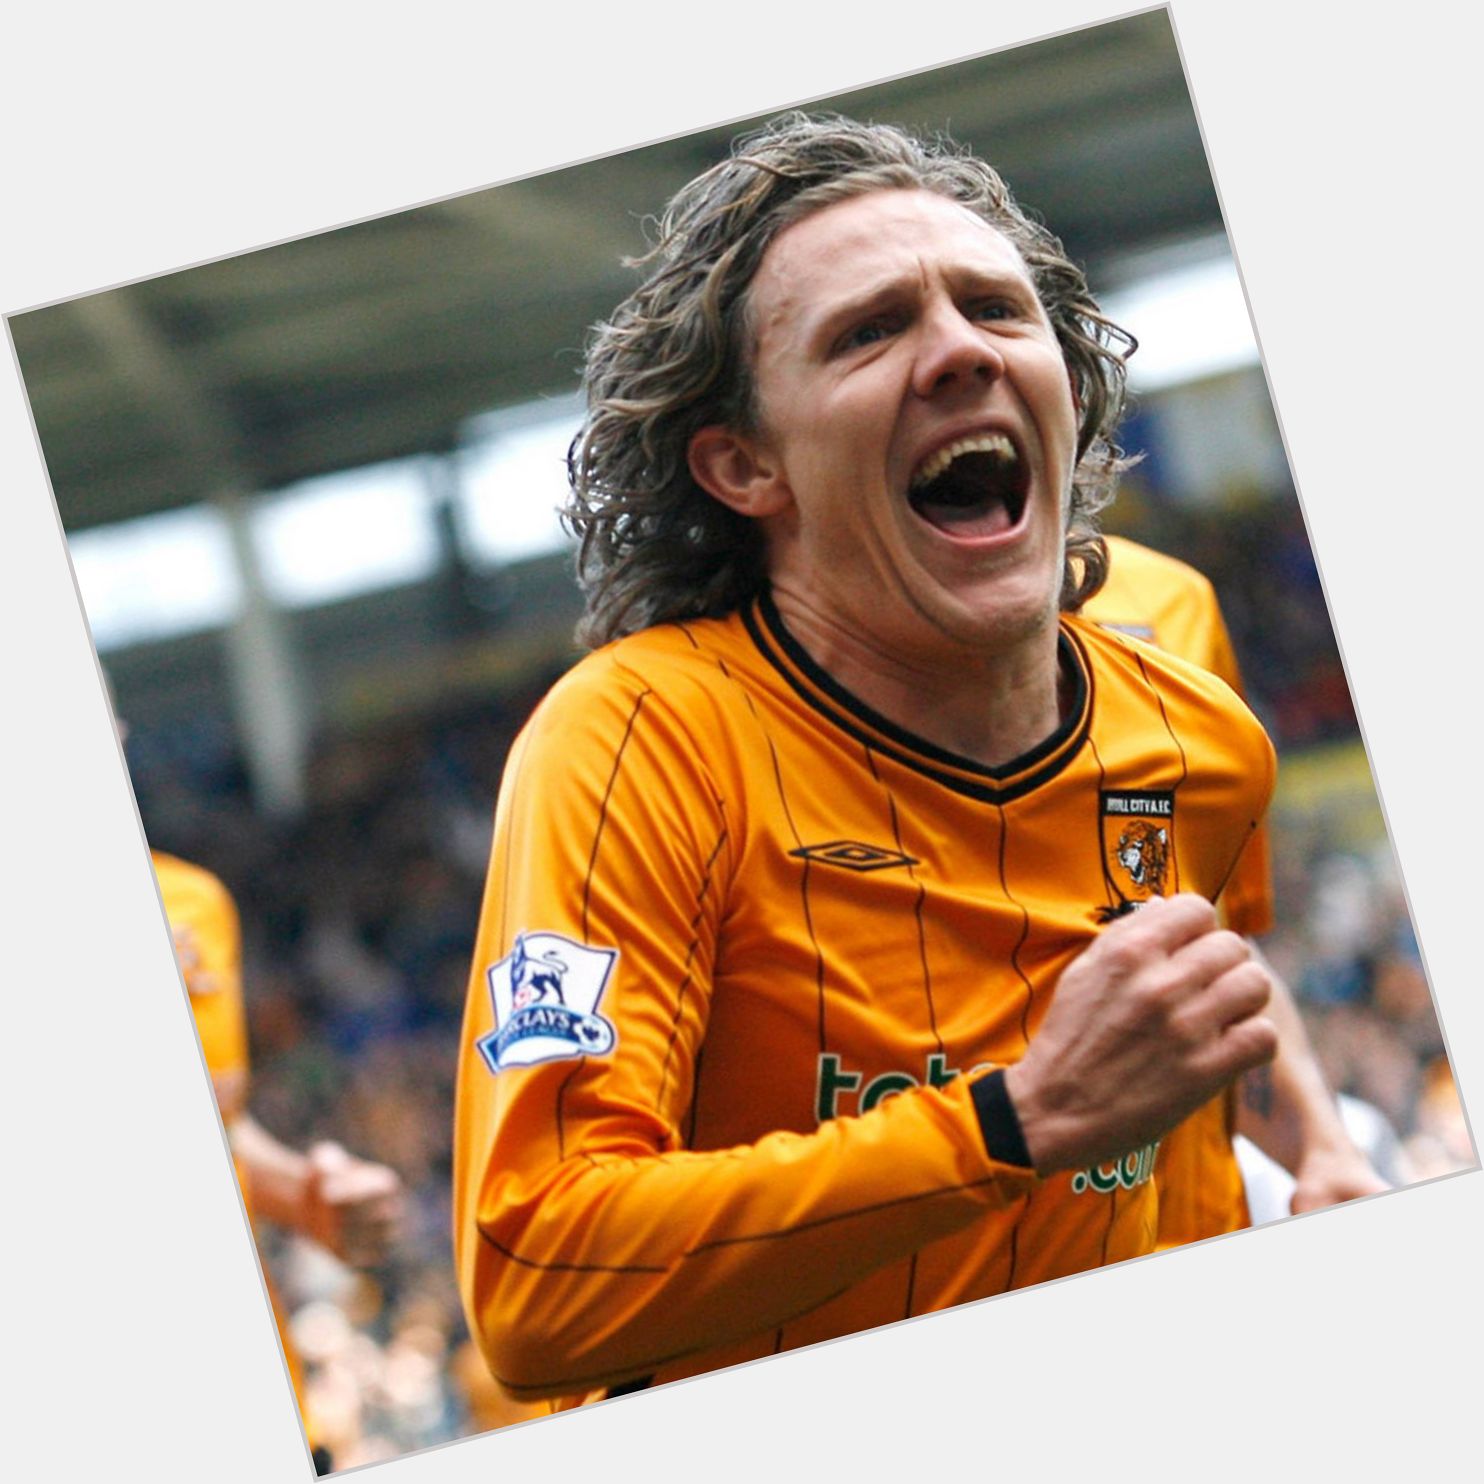 Happy birthday to be the best footballer ever.... Jimmy Bullard.

Oh also its Pelés birthday aswel    